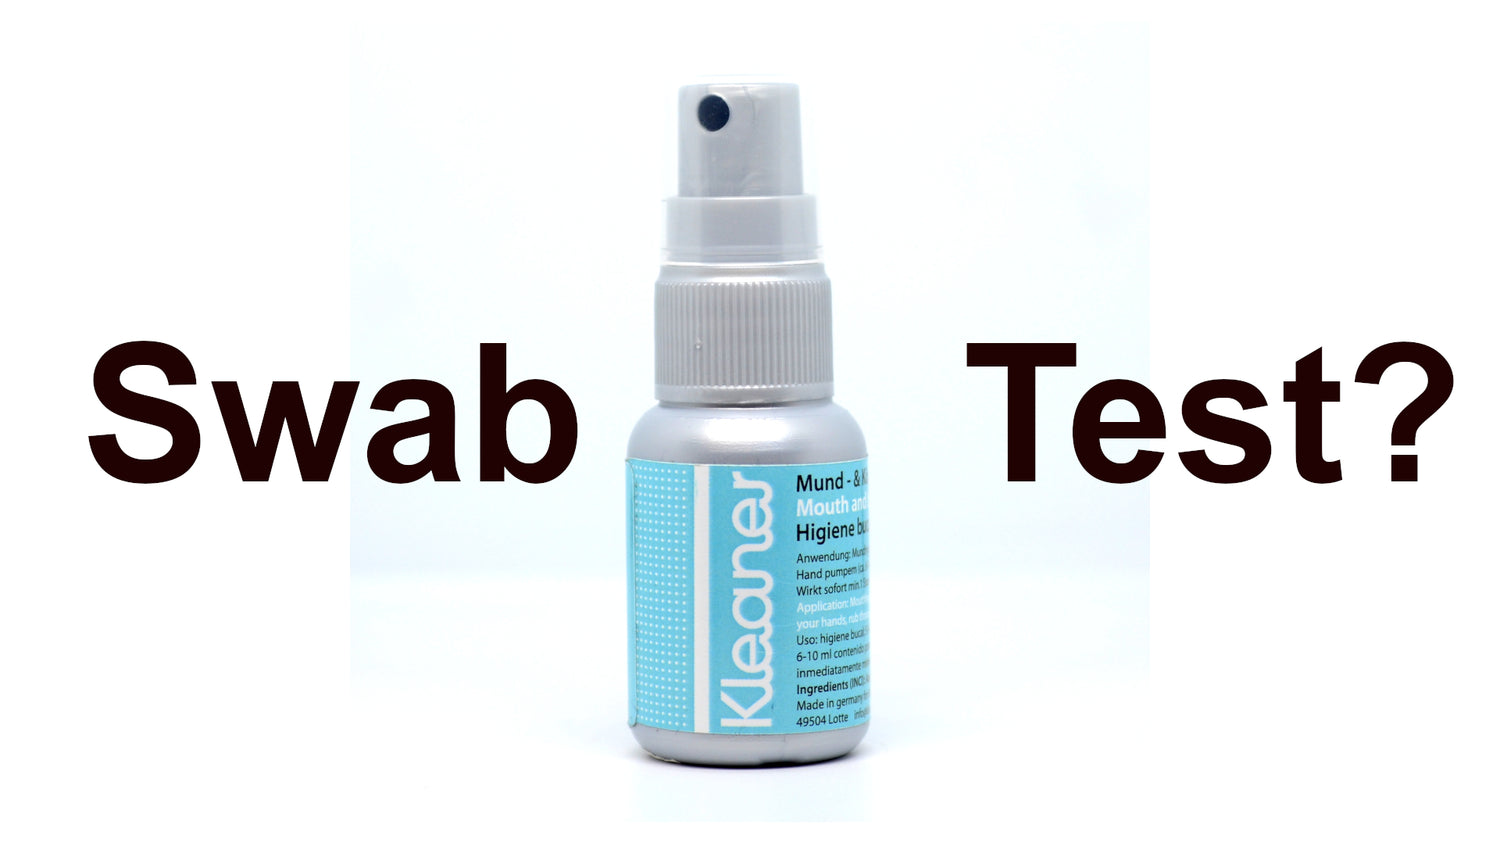 Kleaner mouth spray and the swab test, protect your privacy by denaturing your saliva